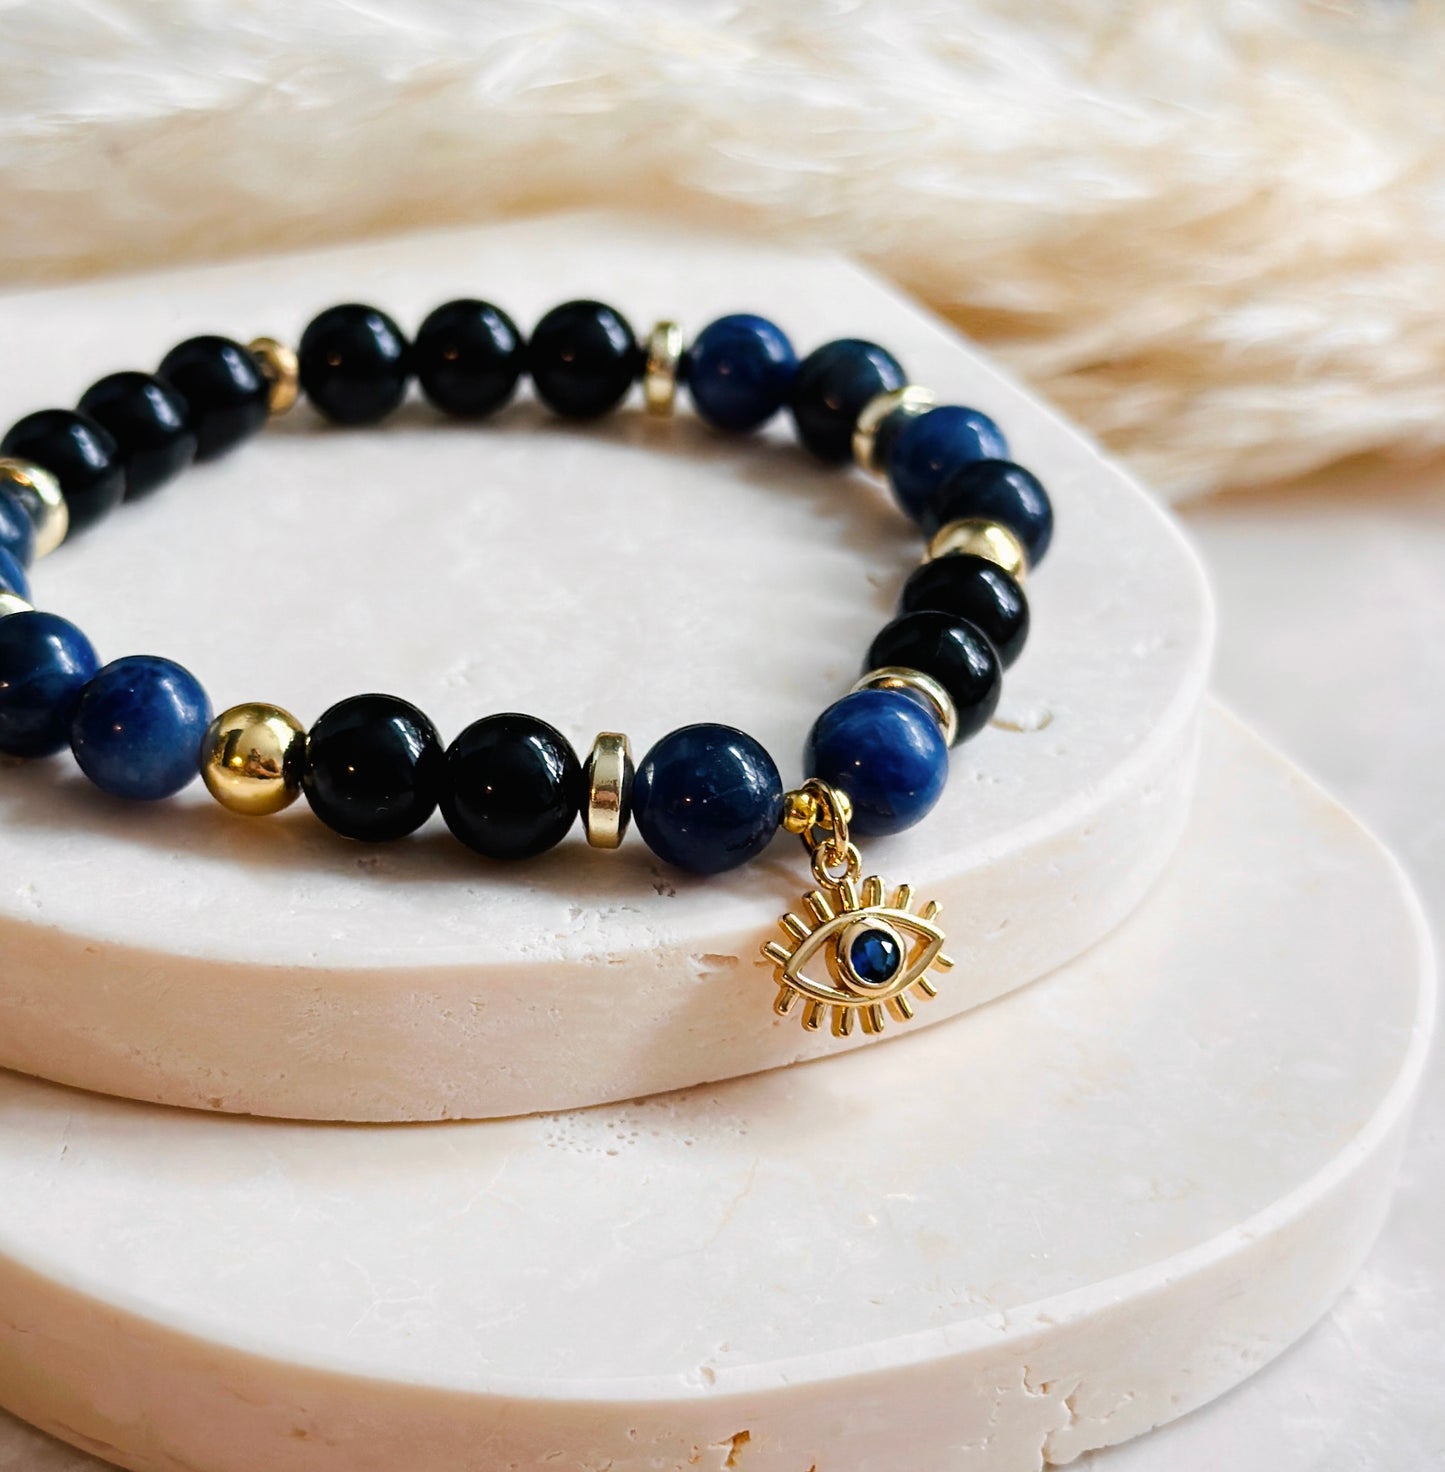 This exquisite gemstone bracelet blends the unique energies of Sodalite and Onyx, accentuated by an intriguing evil eye charm.